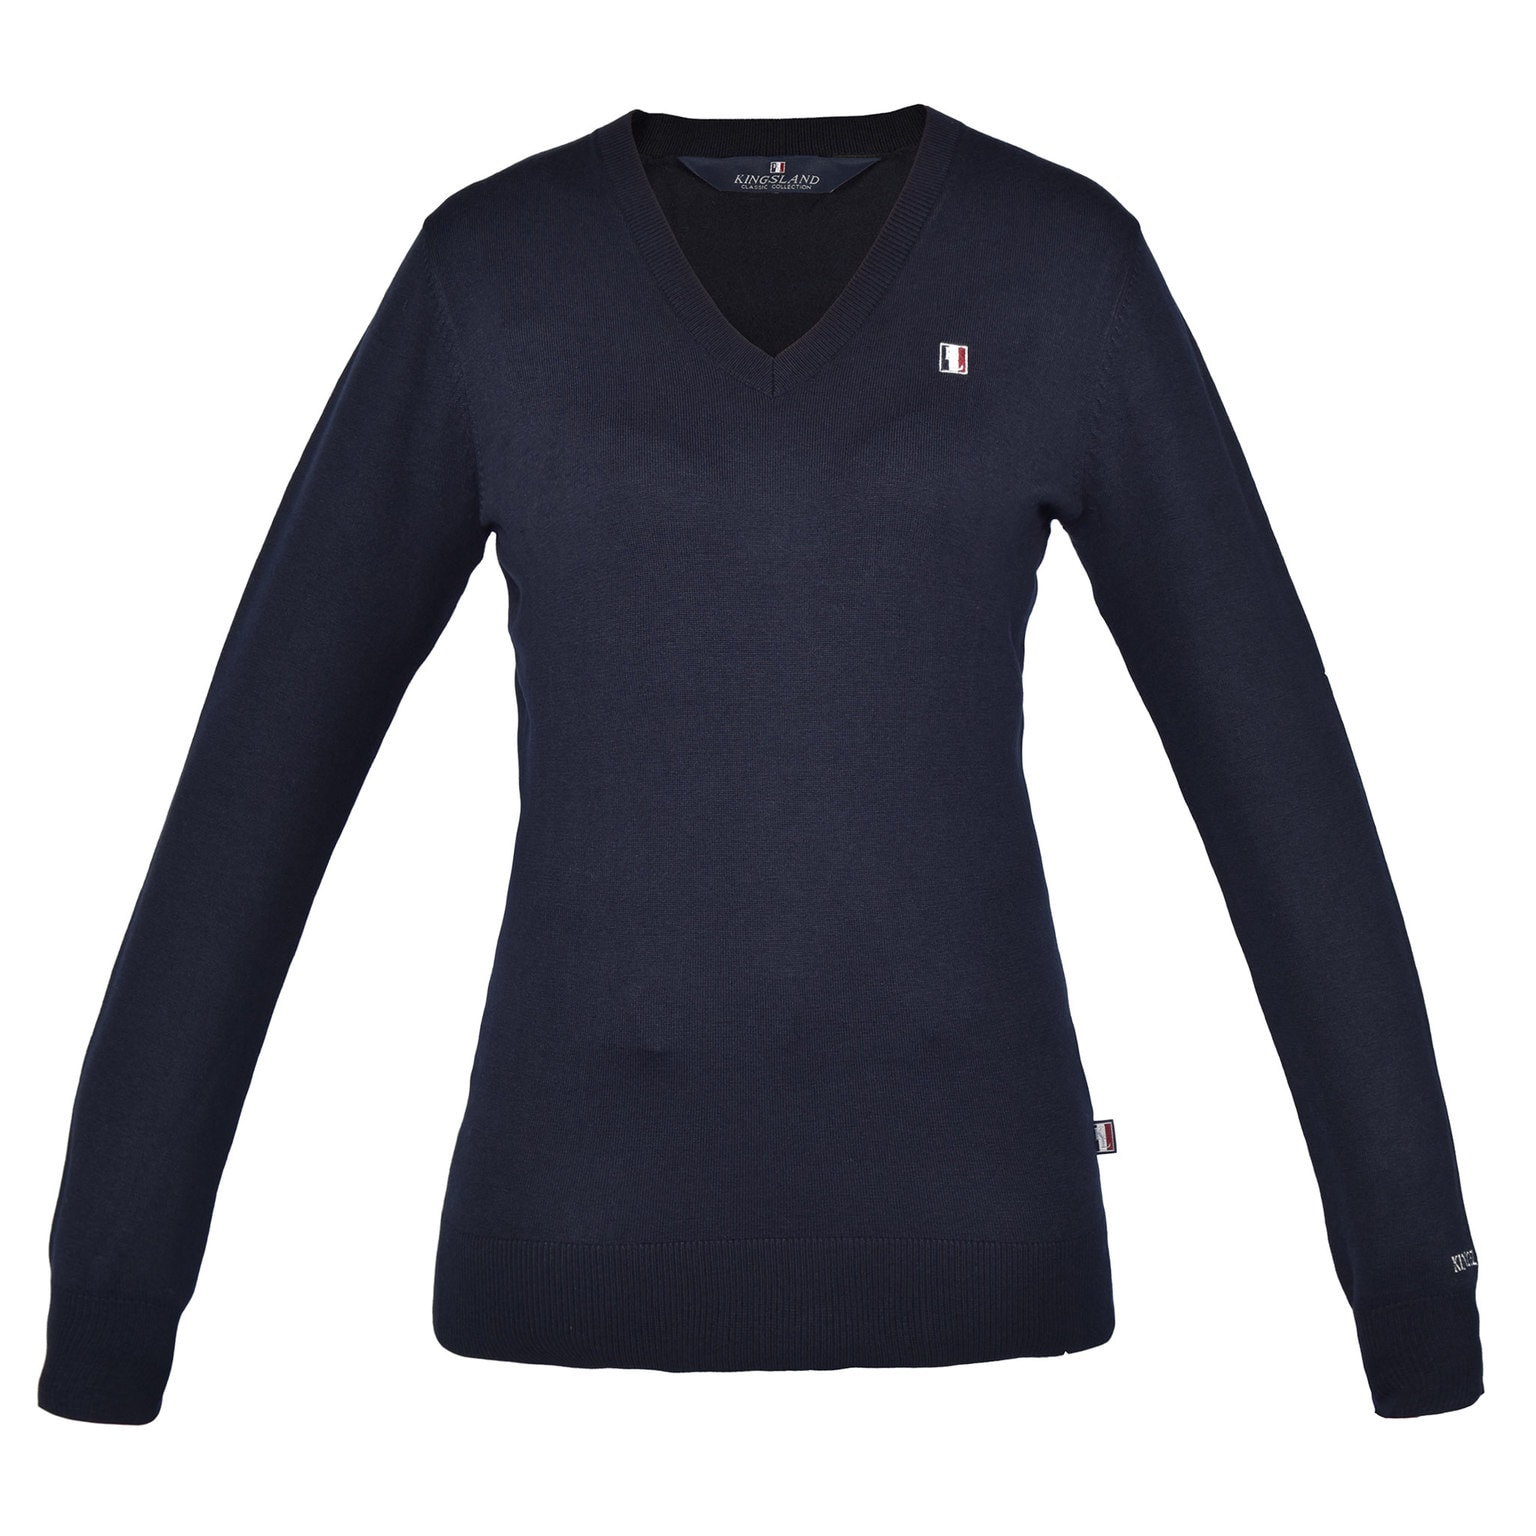 Classic Ladies Knitted Pullover - Marine